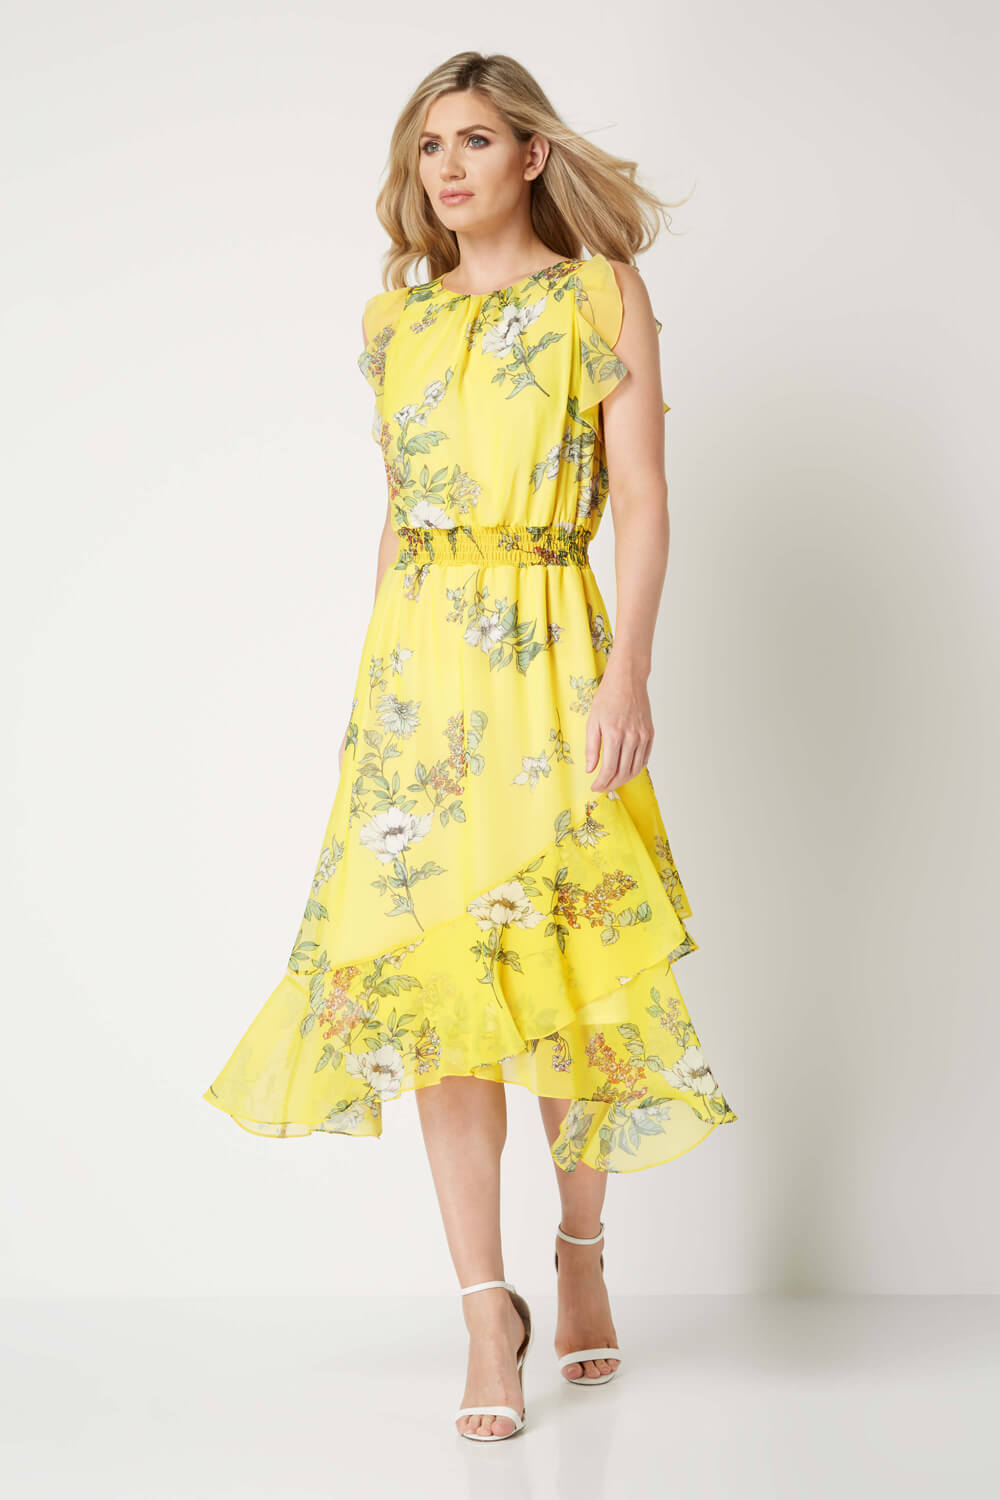 Yellow Floral Frill Midi Dress, Image 3 of 5